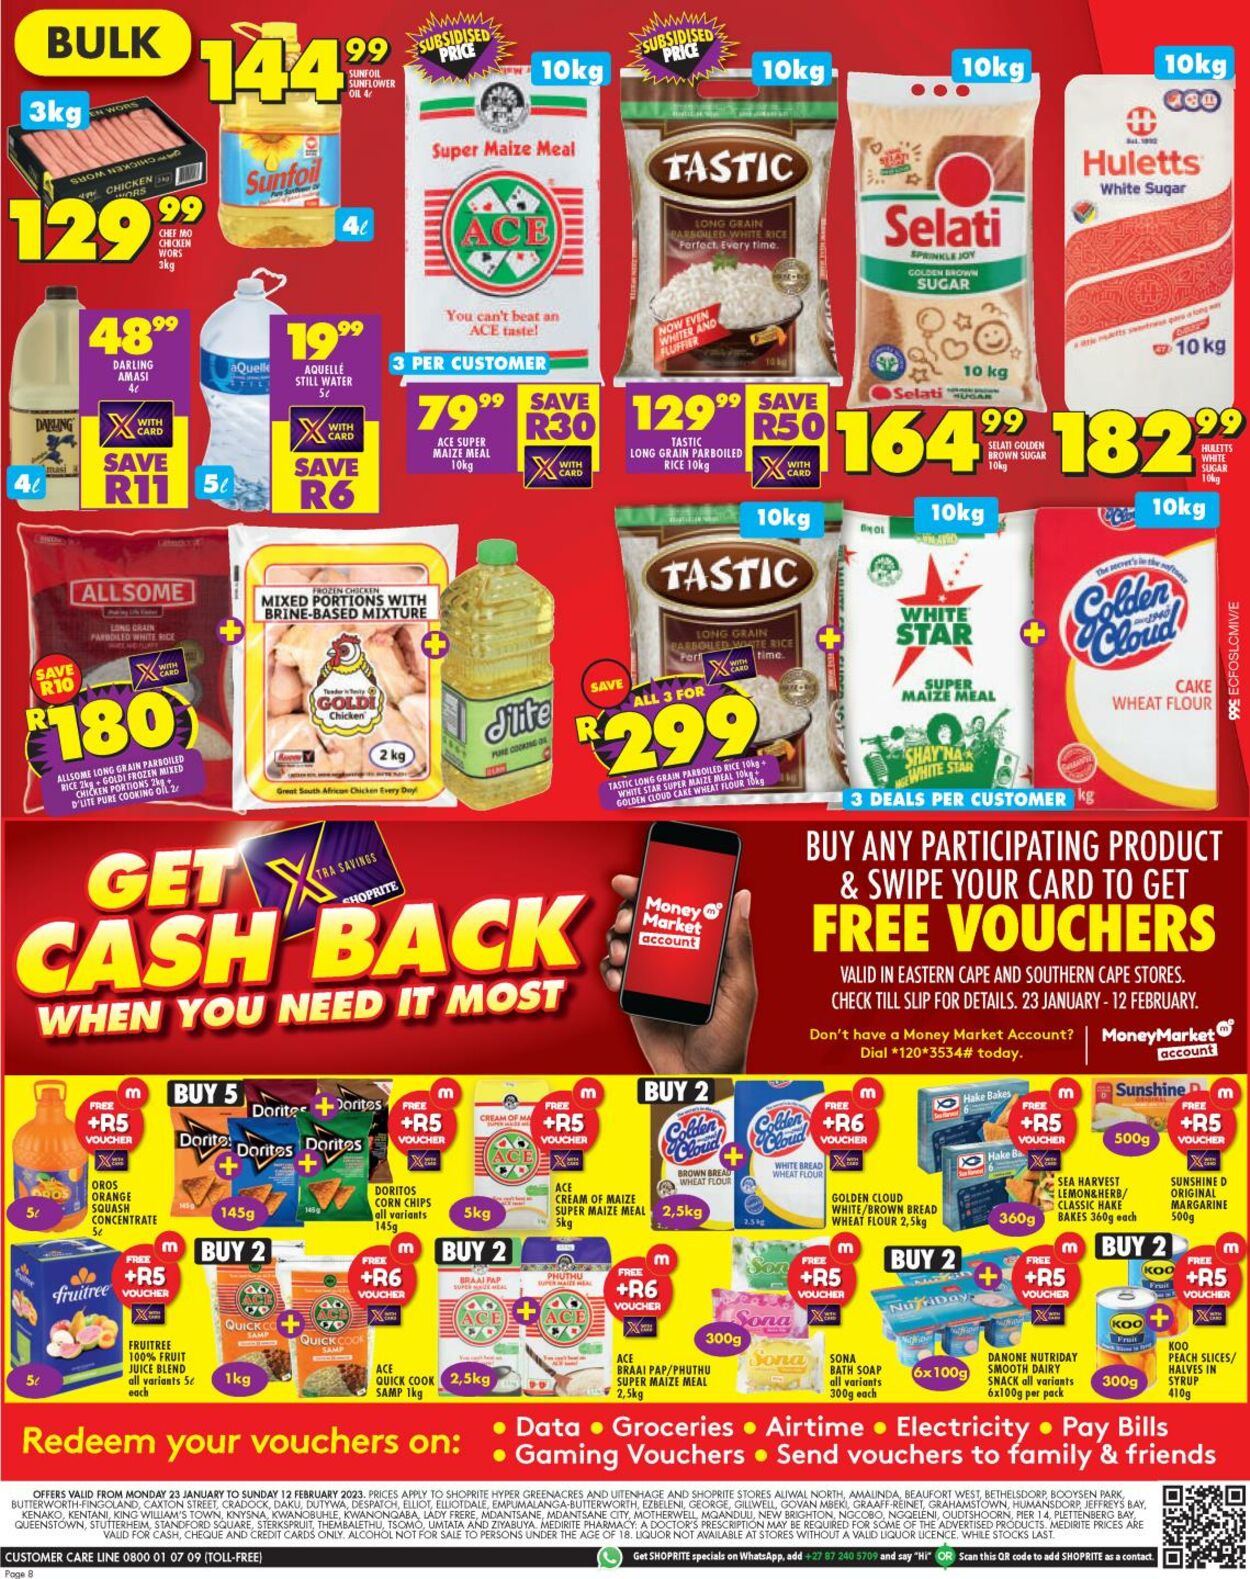 Shoprite Promotional Leaflet Valid from 23.01 to 12.02 Page nb 7